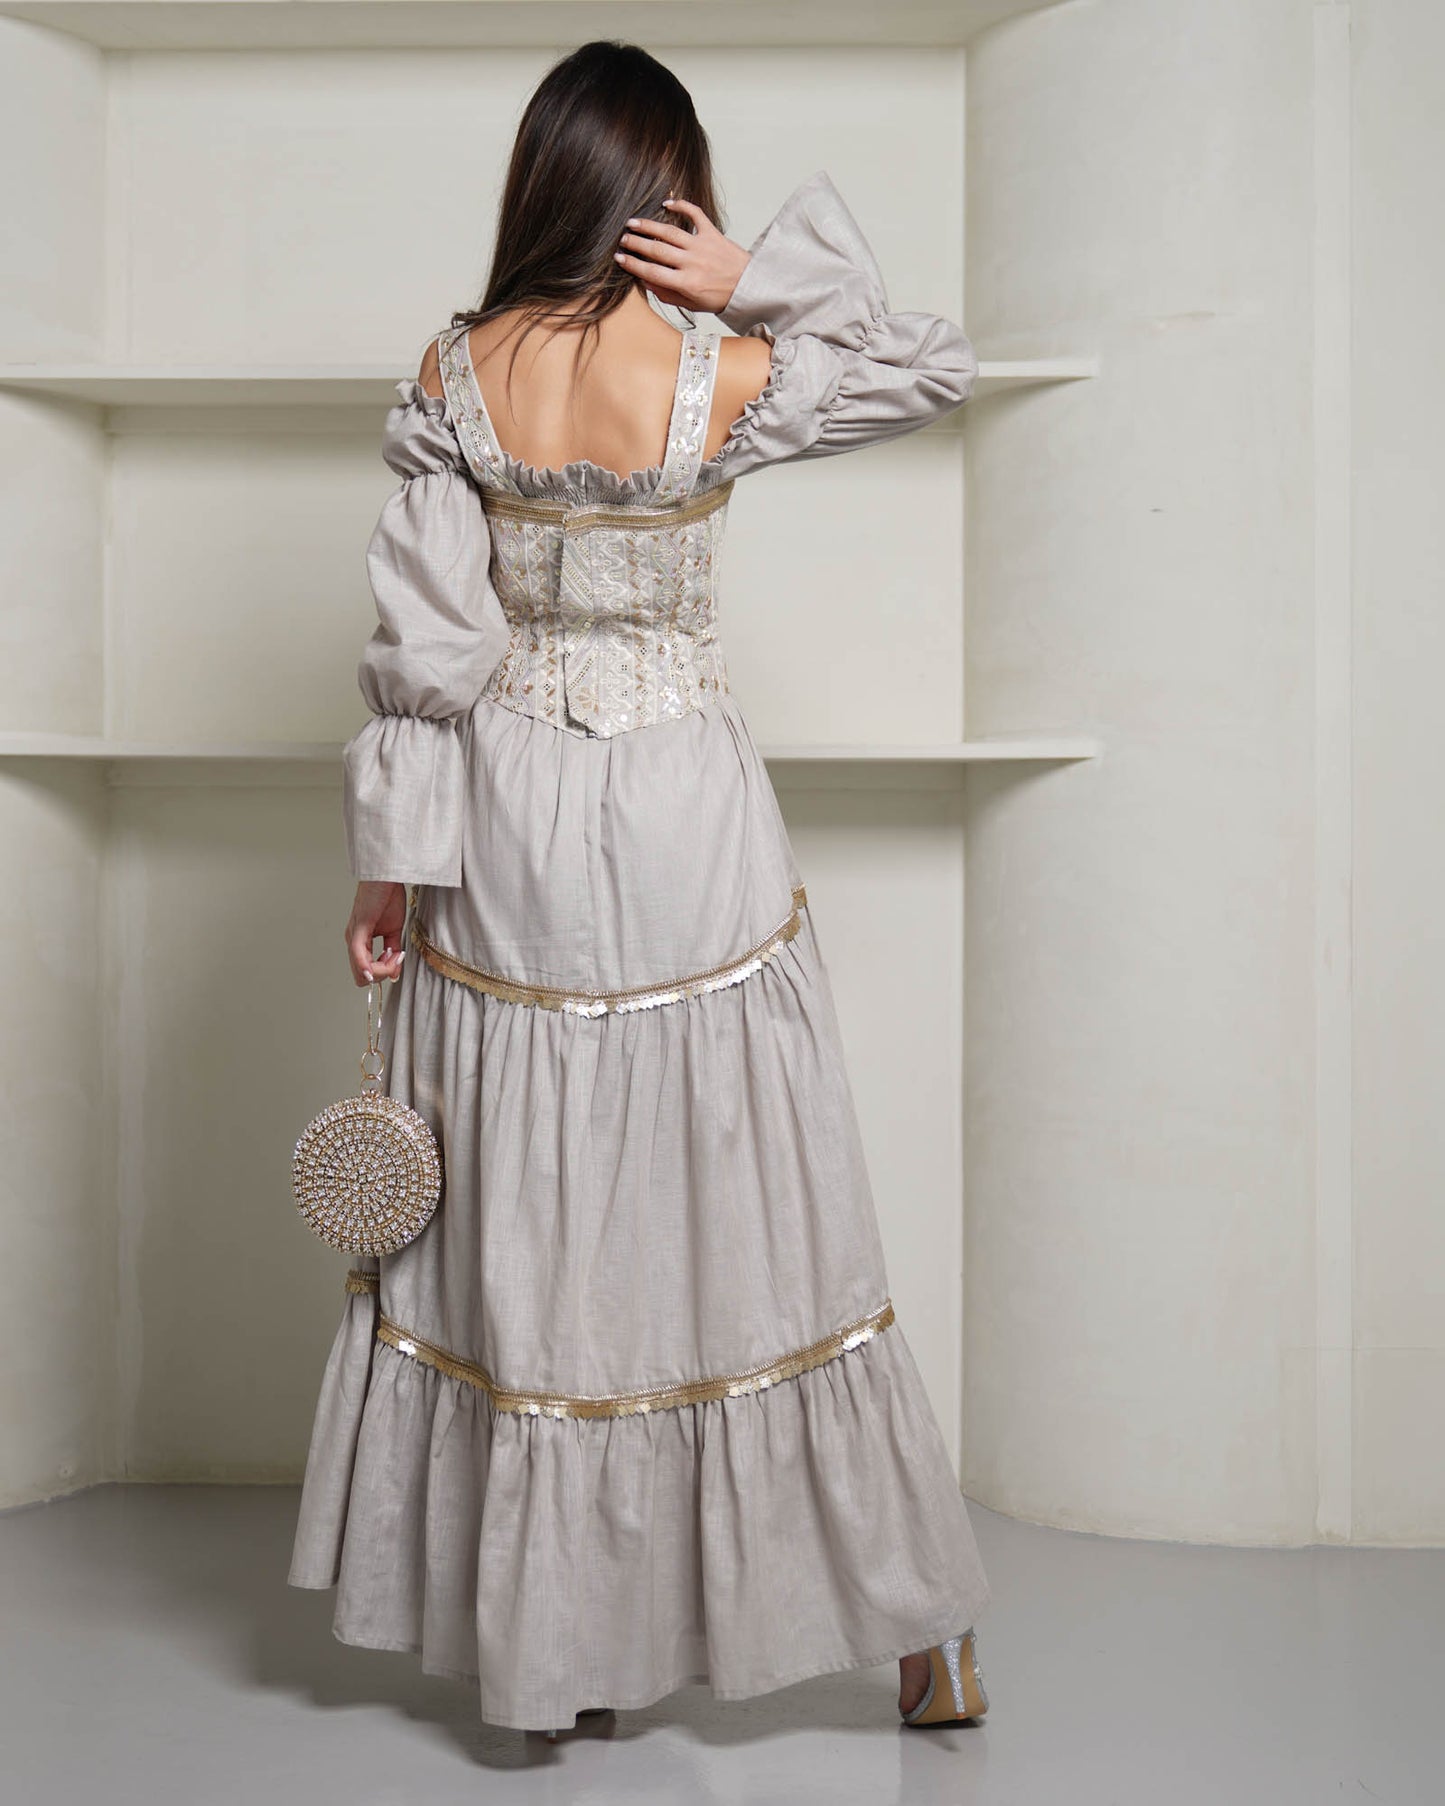 Corset gilet paired with off shoulder linen dress in grey